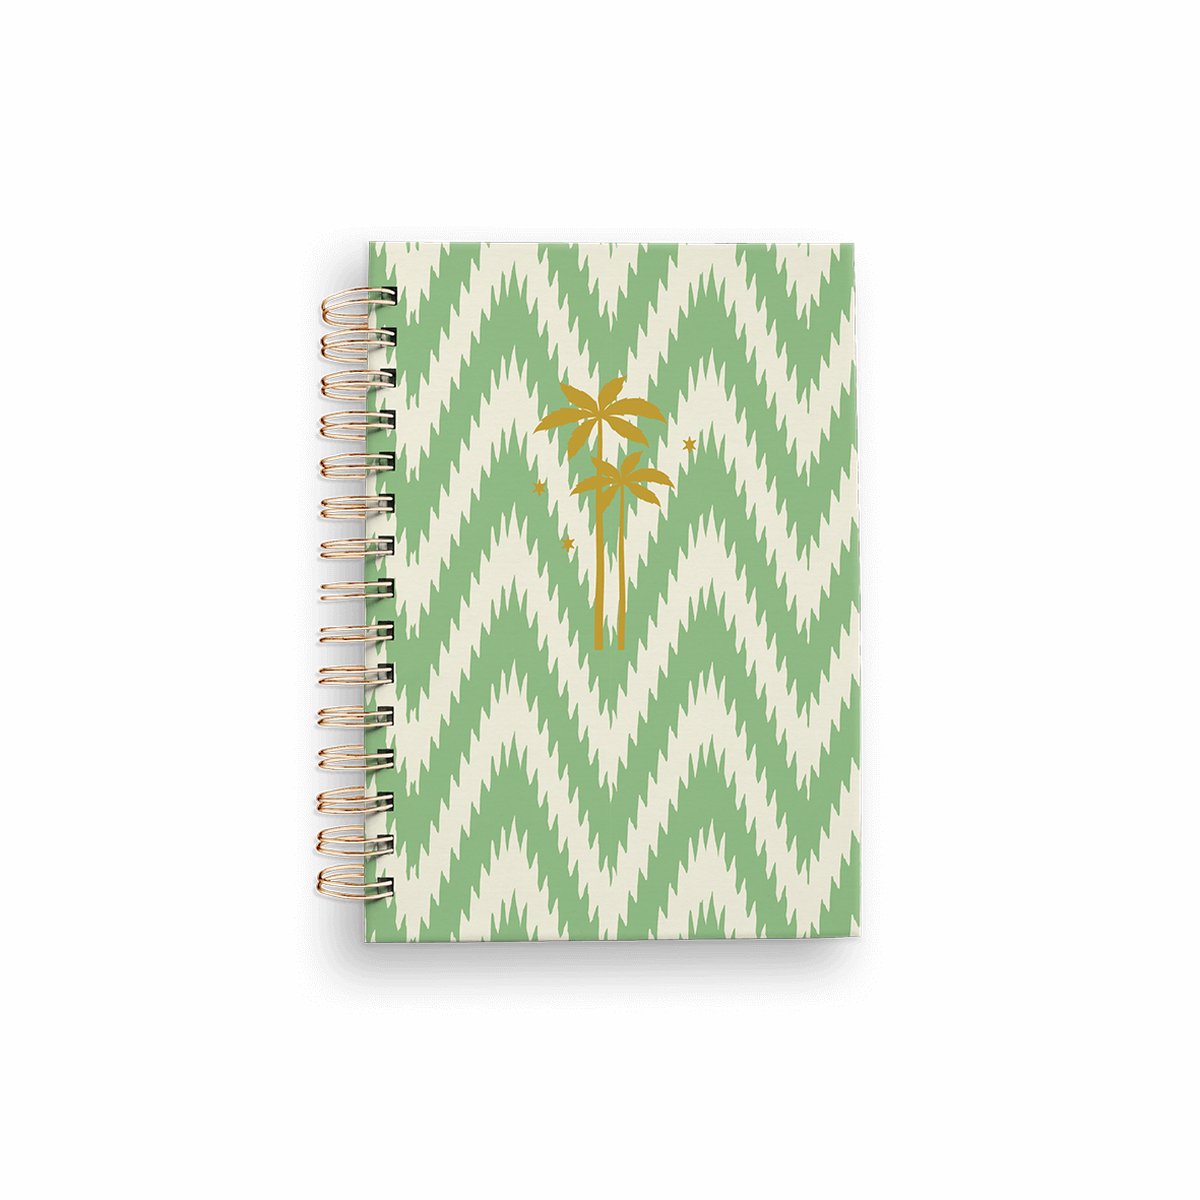 Creative Lab Amsterdam stationery - Notitieboek - Ikat Green design - Wire-O - A6 formaat